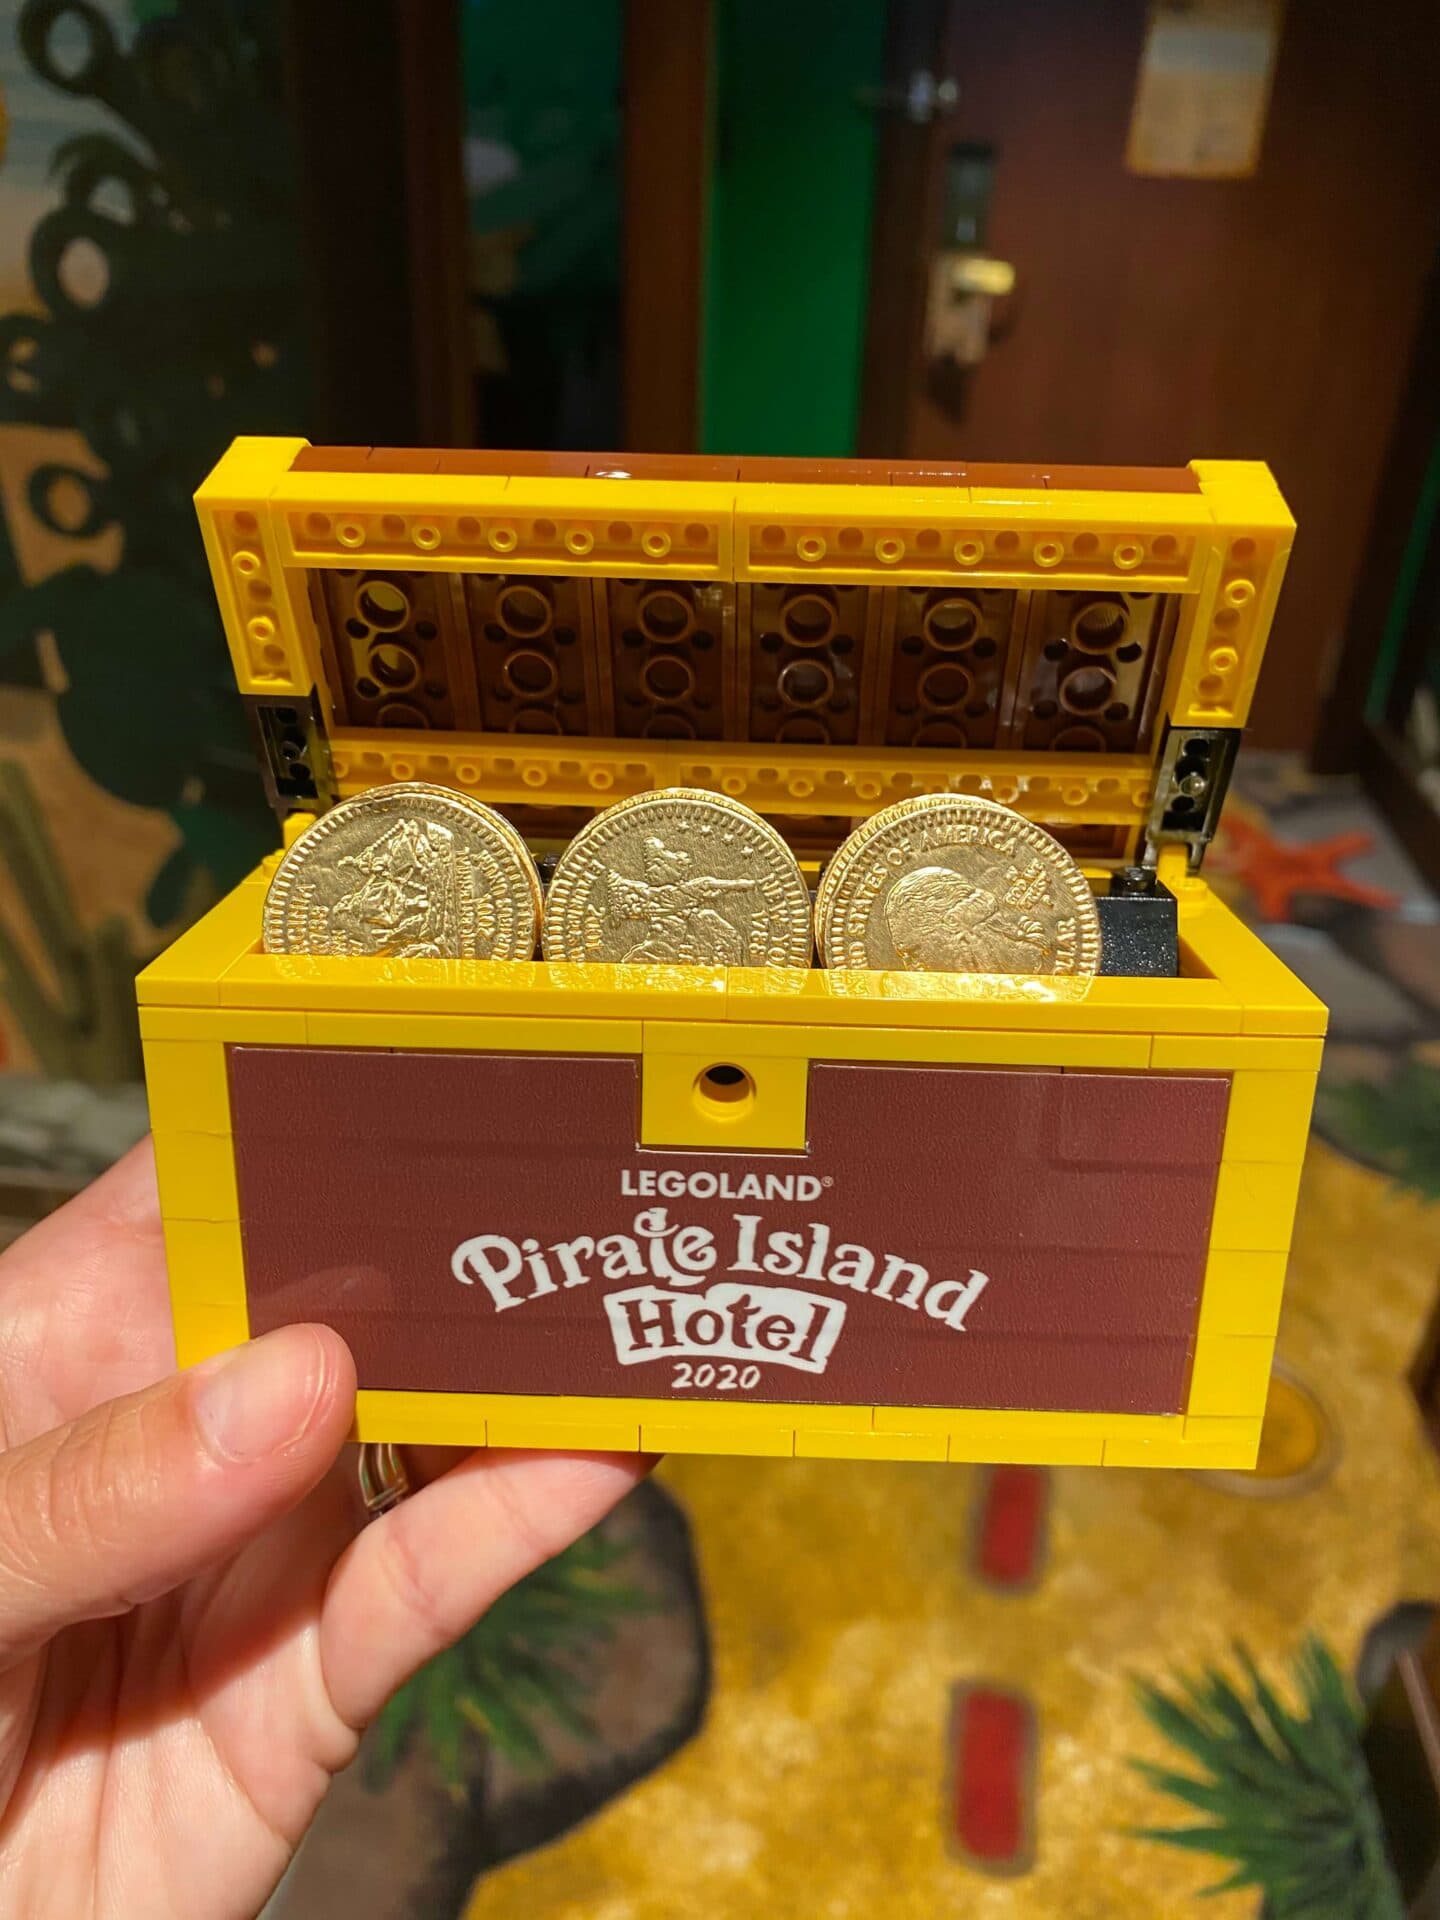 Our Stay At Legoland Pirate Island Hotel July 2020